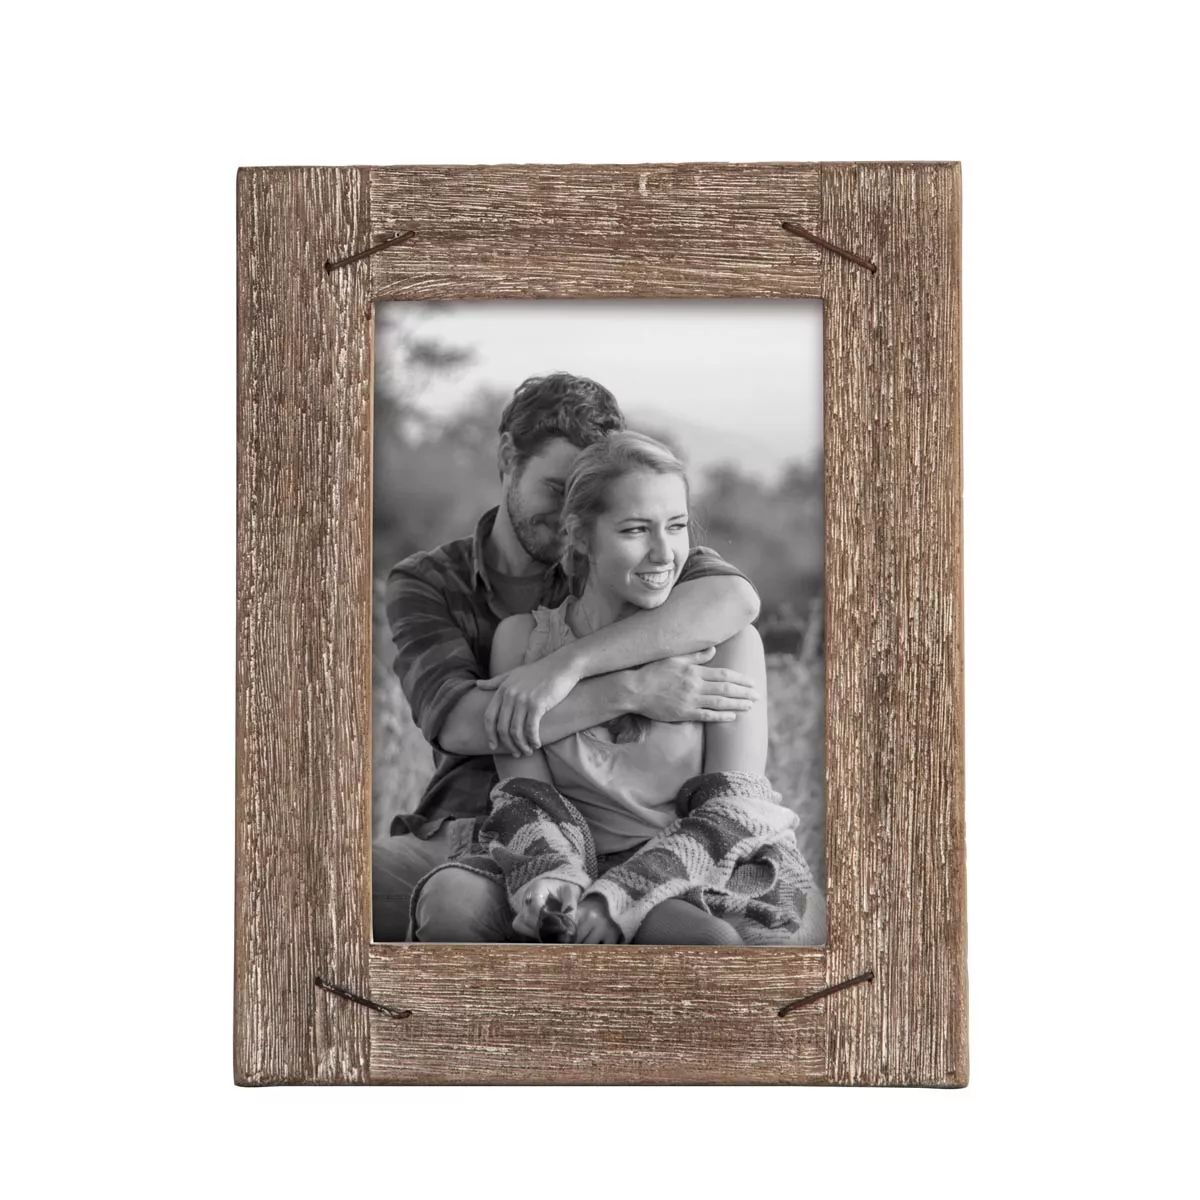 5 x 7 inch Decorative Distressed Wood Picture Frame with Nail Accents - Foreside Home & Garden | Target